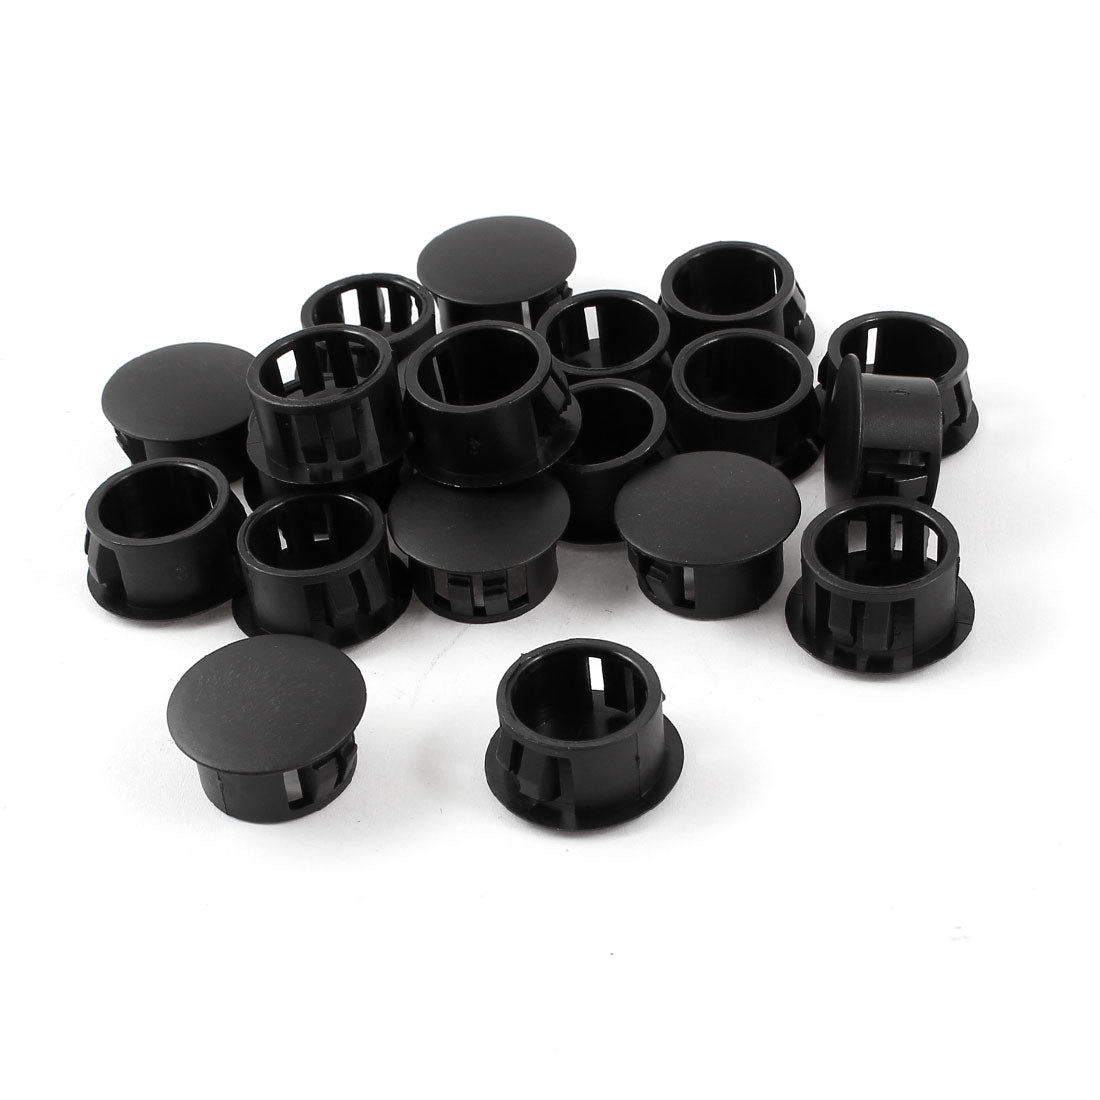 uxcell Uxcell 20pcs Black Plastic 16mm Diameter Snap in Type Locking Hole Button Cover 16mm x 20mm x 10mm